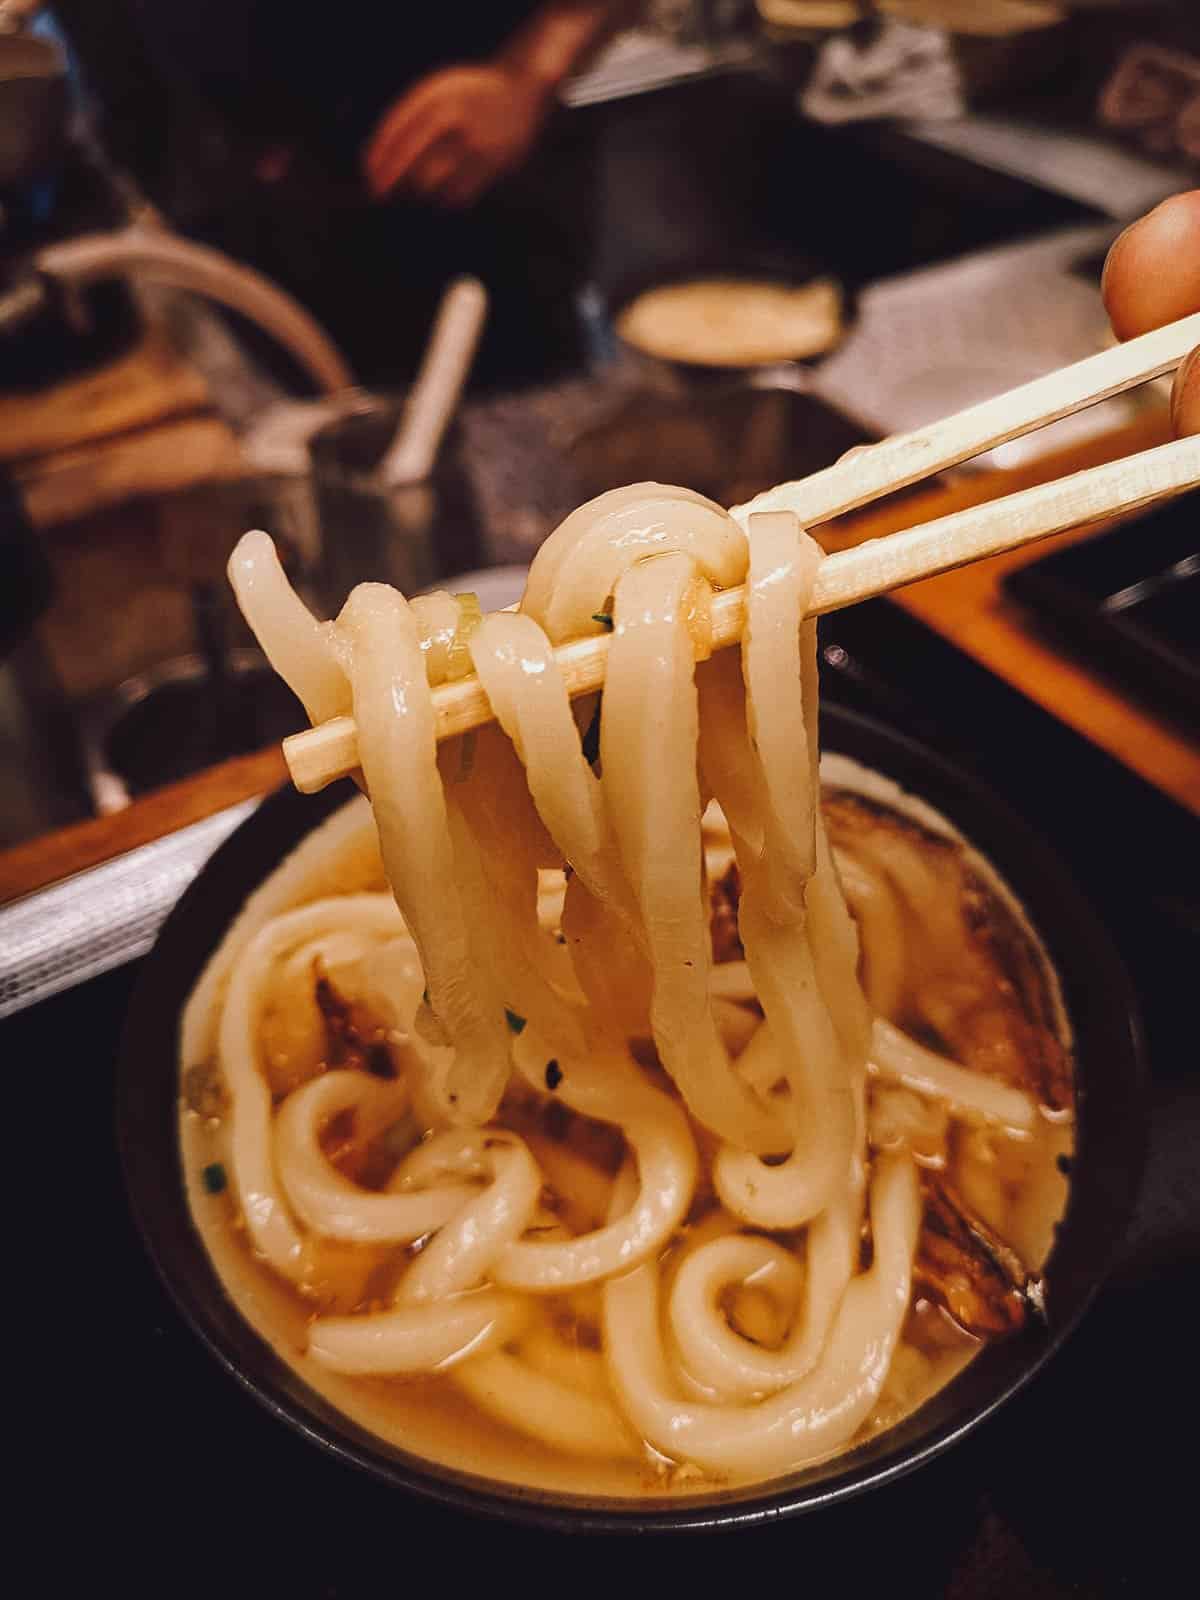 Udon with tempura scraps, a Japanese noodle soup dish made with thick wheat noodles